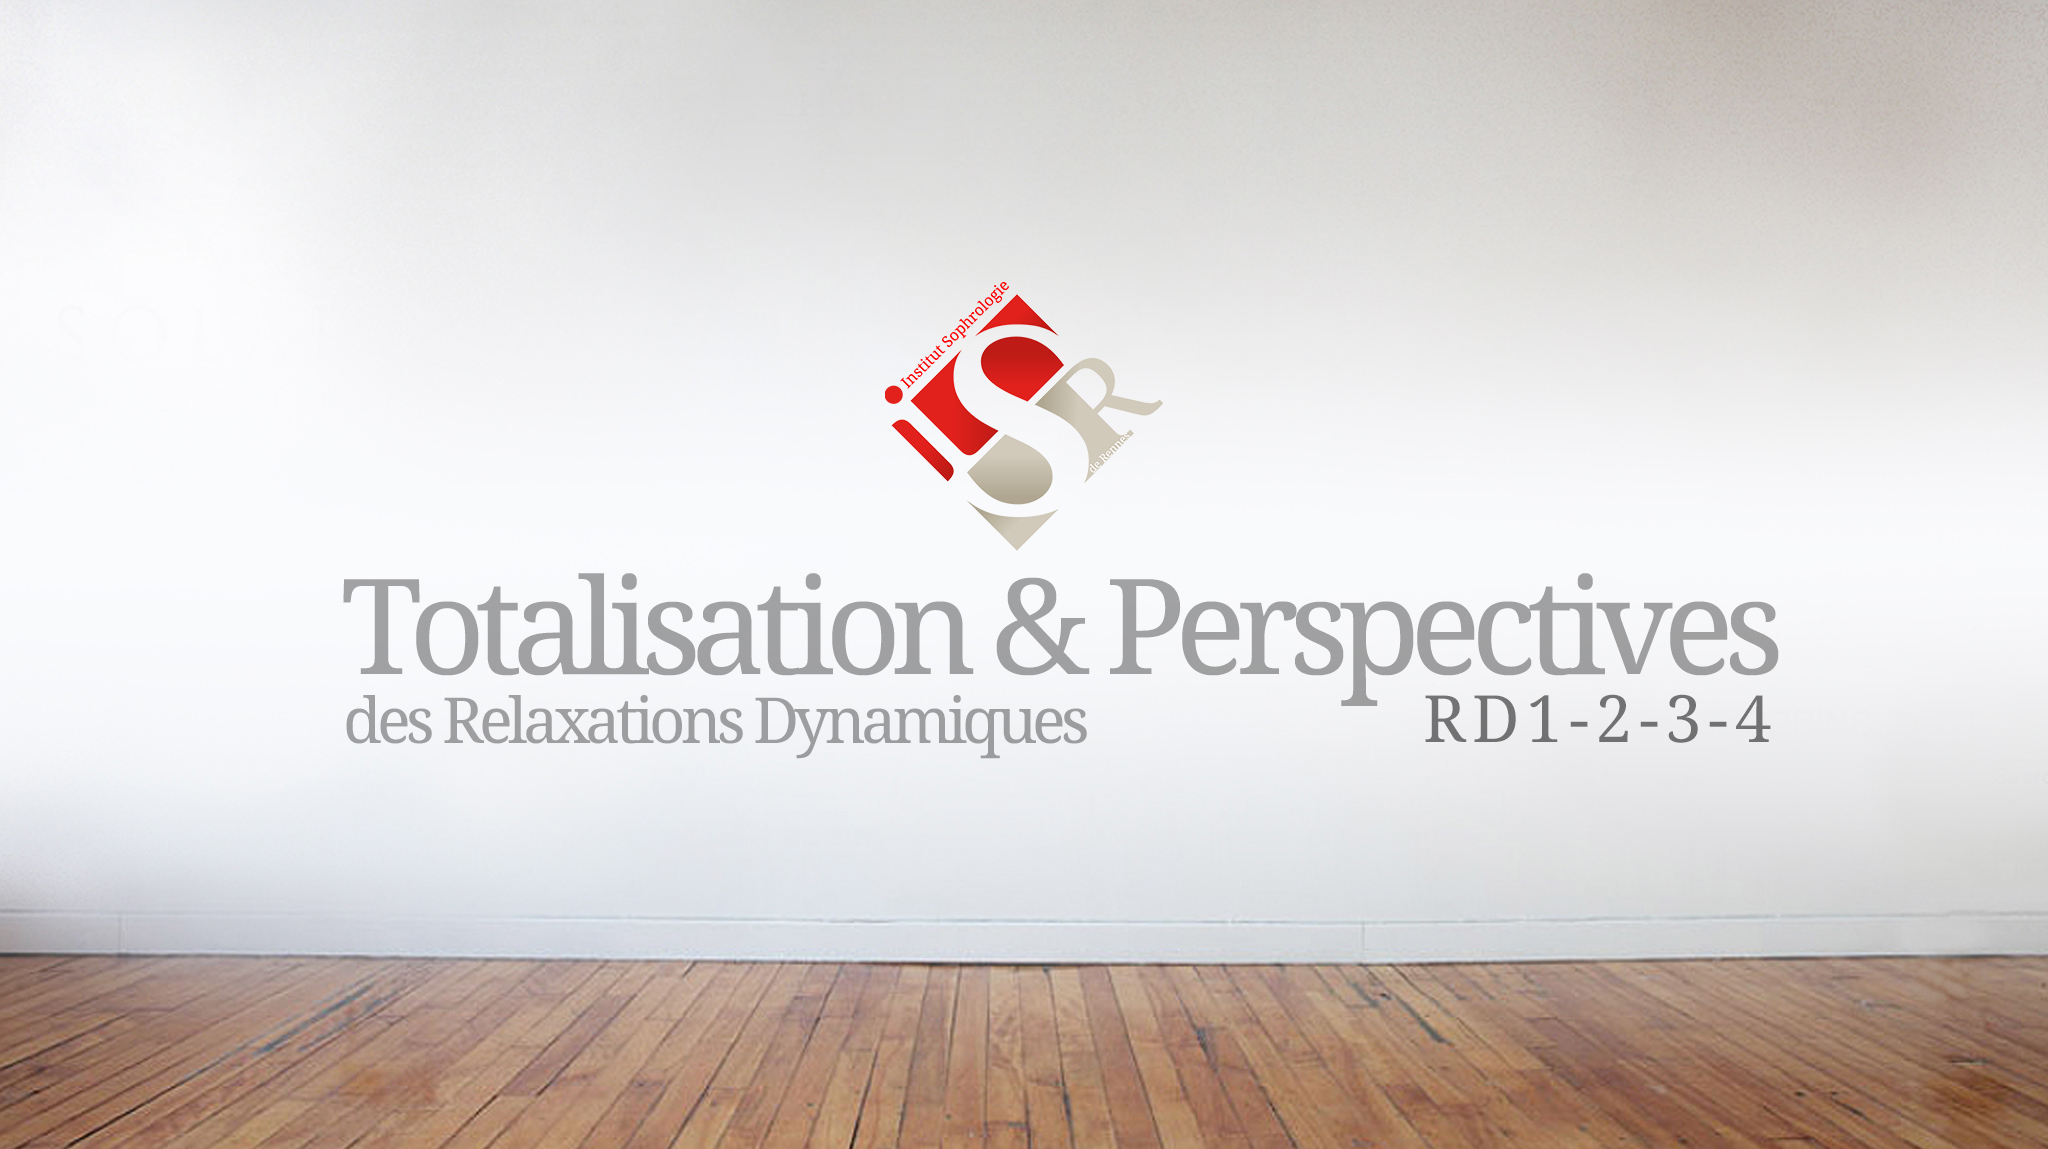 Totalisation & Perspectives des relaxations dynamiques